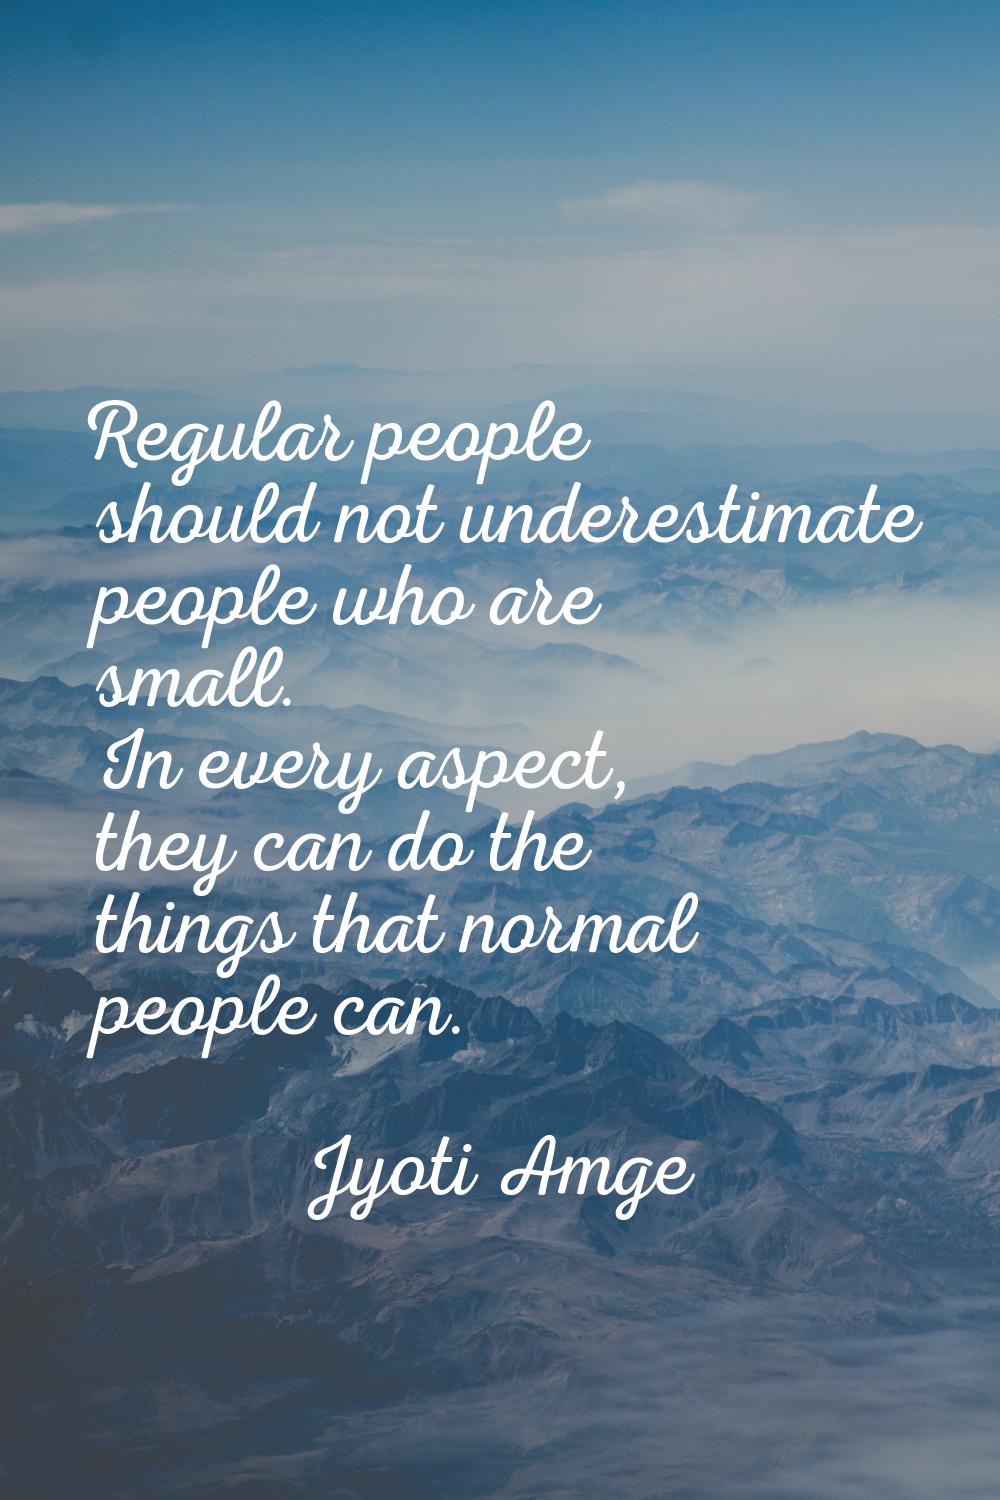 Regular people should not underestimate people who are small. In every aspect, they can do the thin